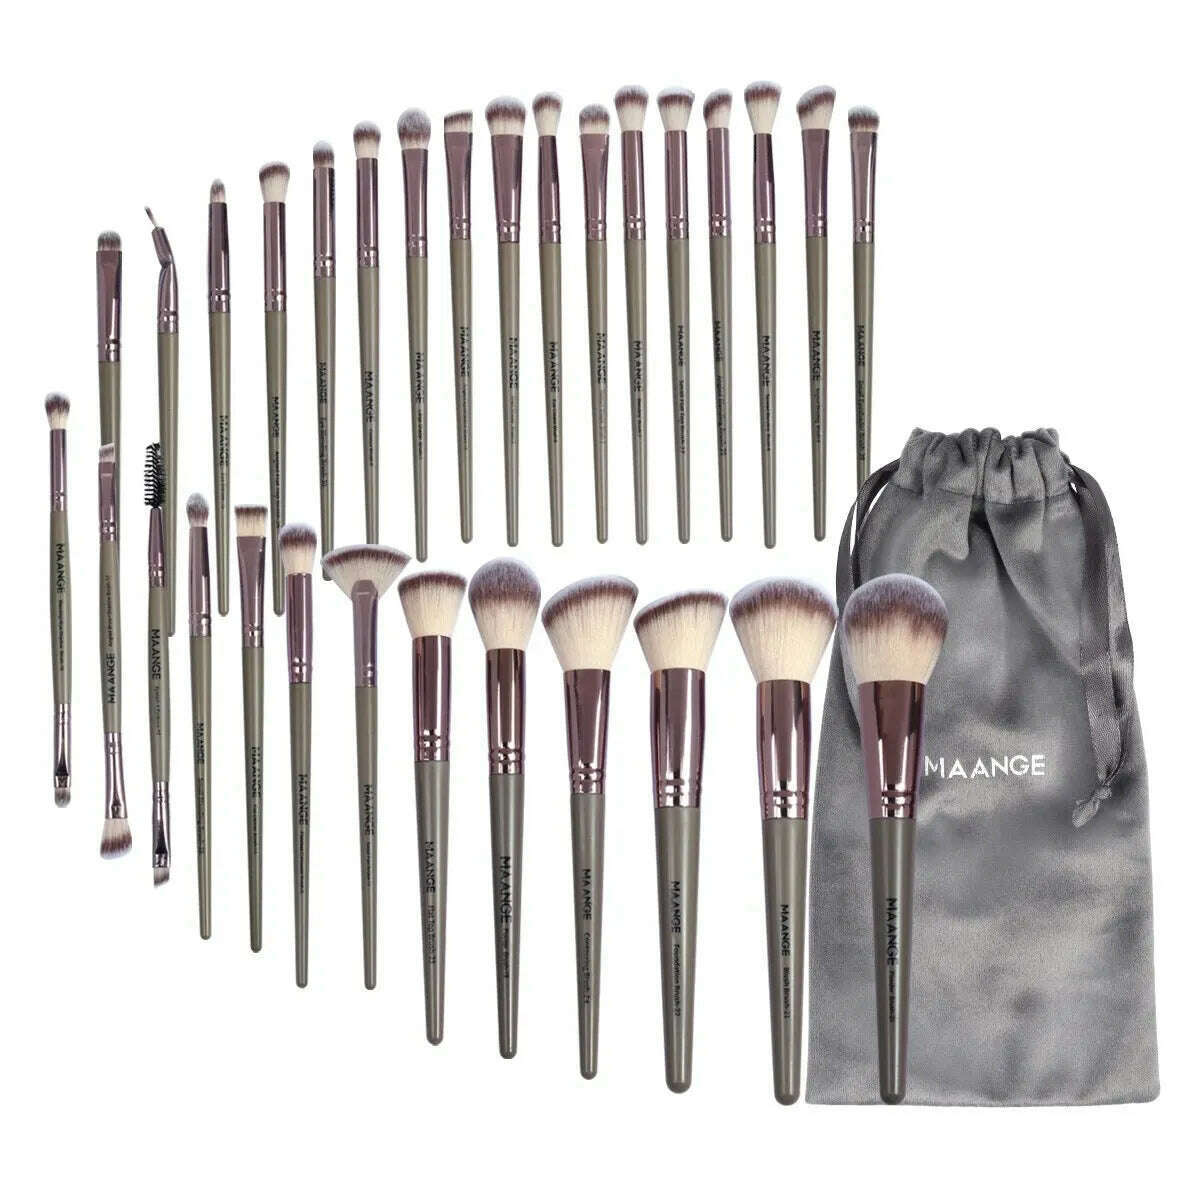 KIMLUD, MAANGE 30pcs Professional Makeup Brush Set Foundation Concealers Eye Shadows Powder Blush Blending Brushes Beauty Tools with Bag, Champagne Gold, KIMLUD Women's Clothes